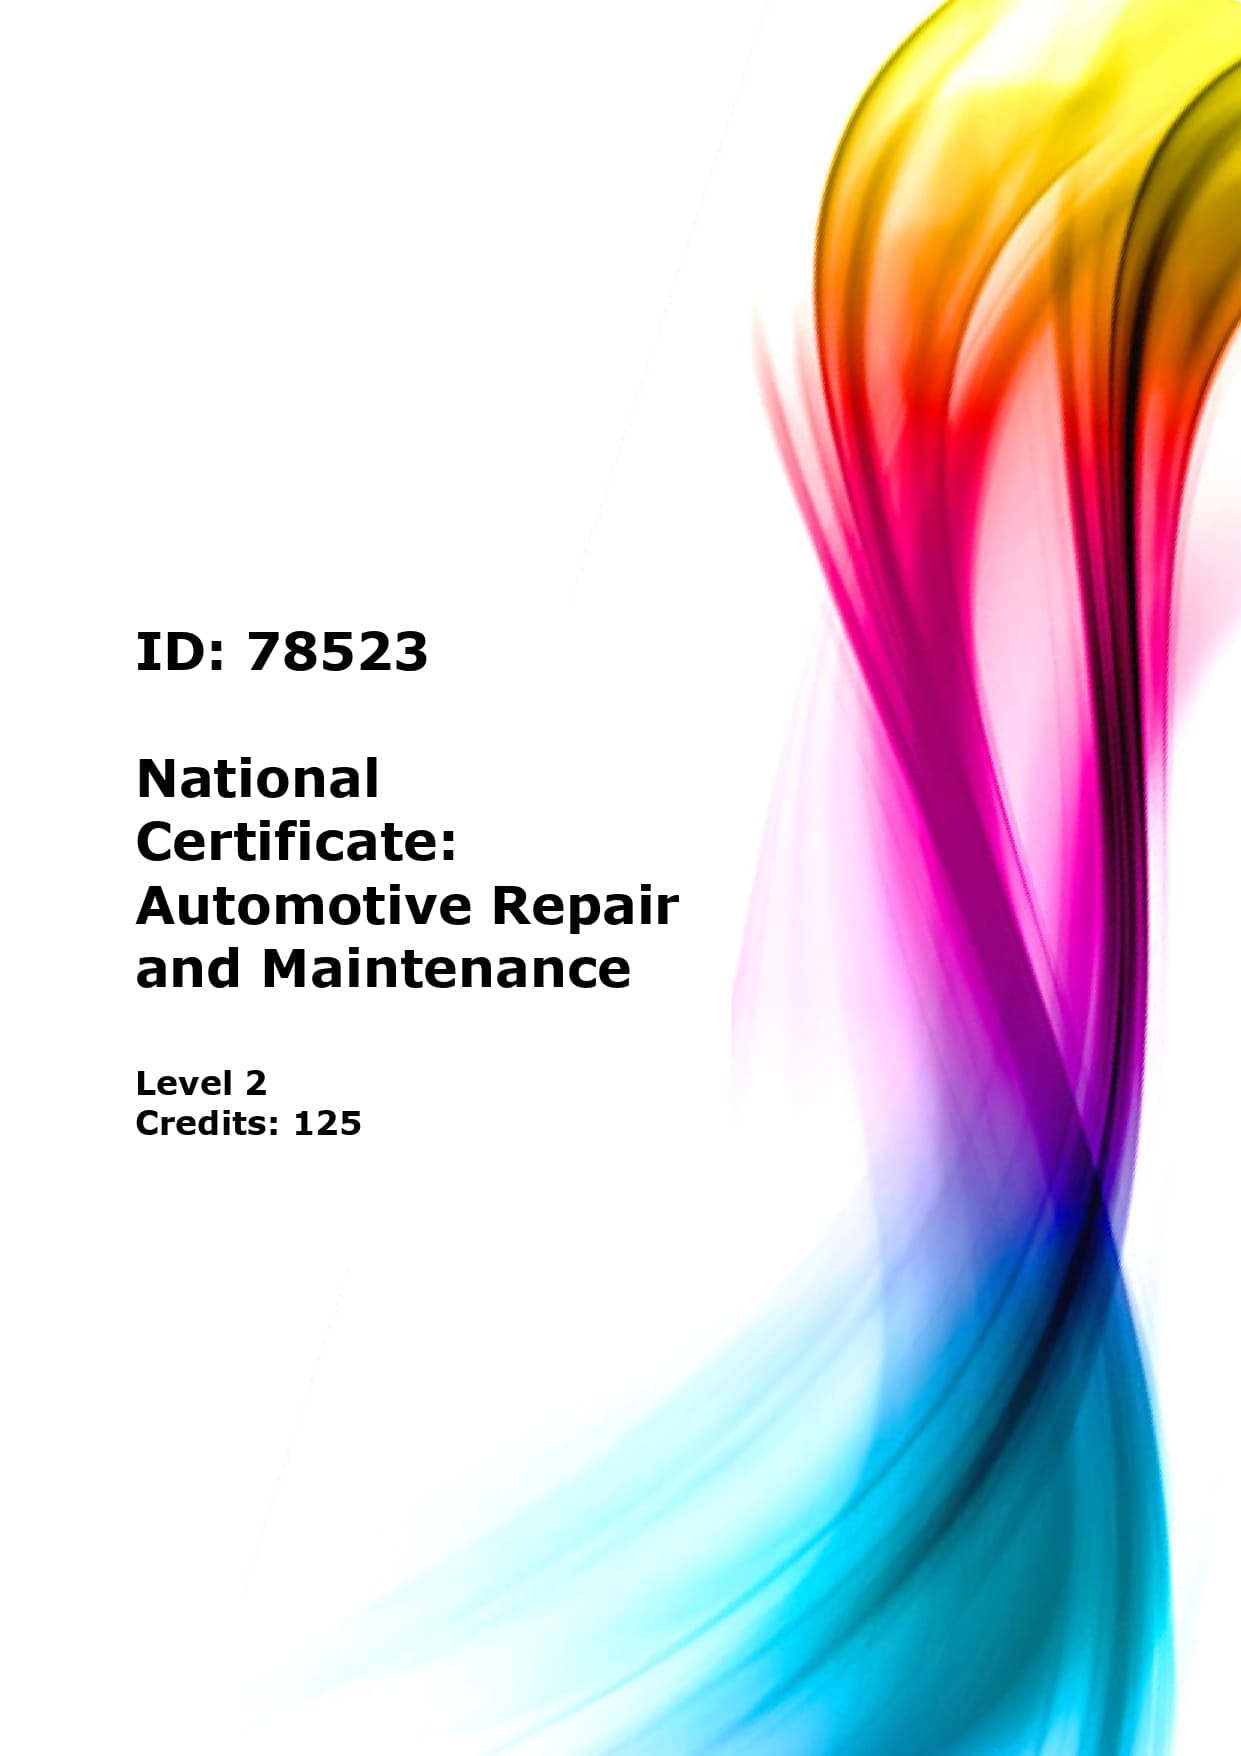 National Certificate: Automotive Repair and Maintenance